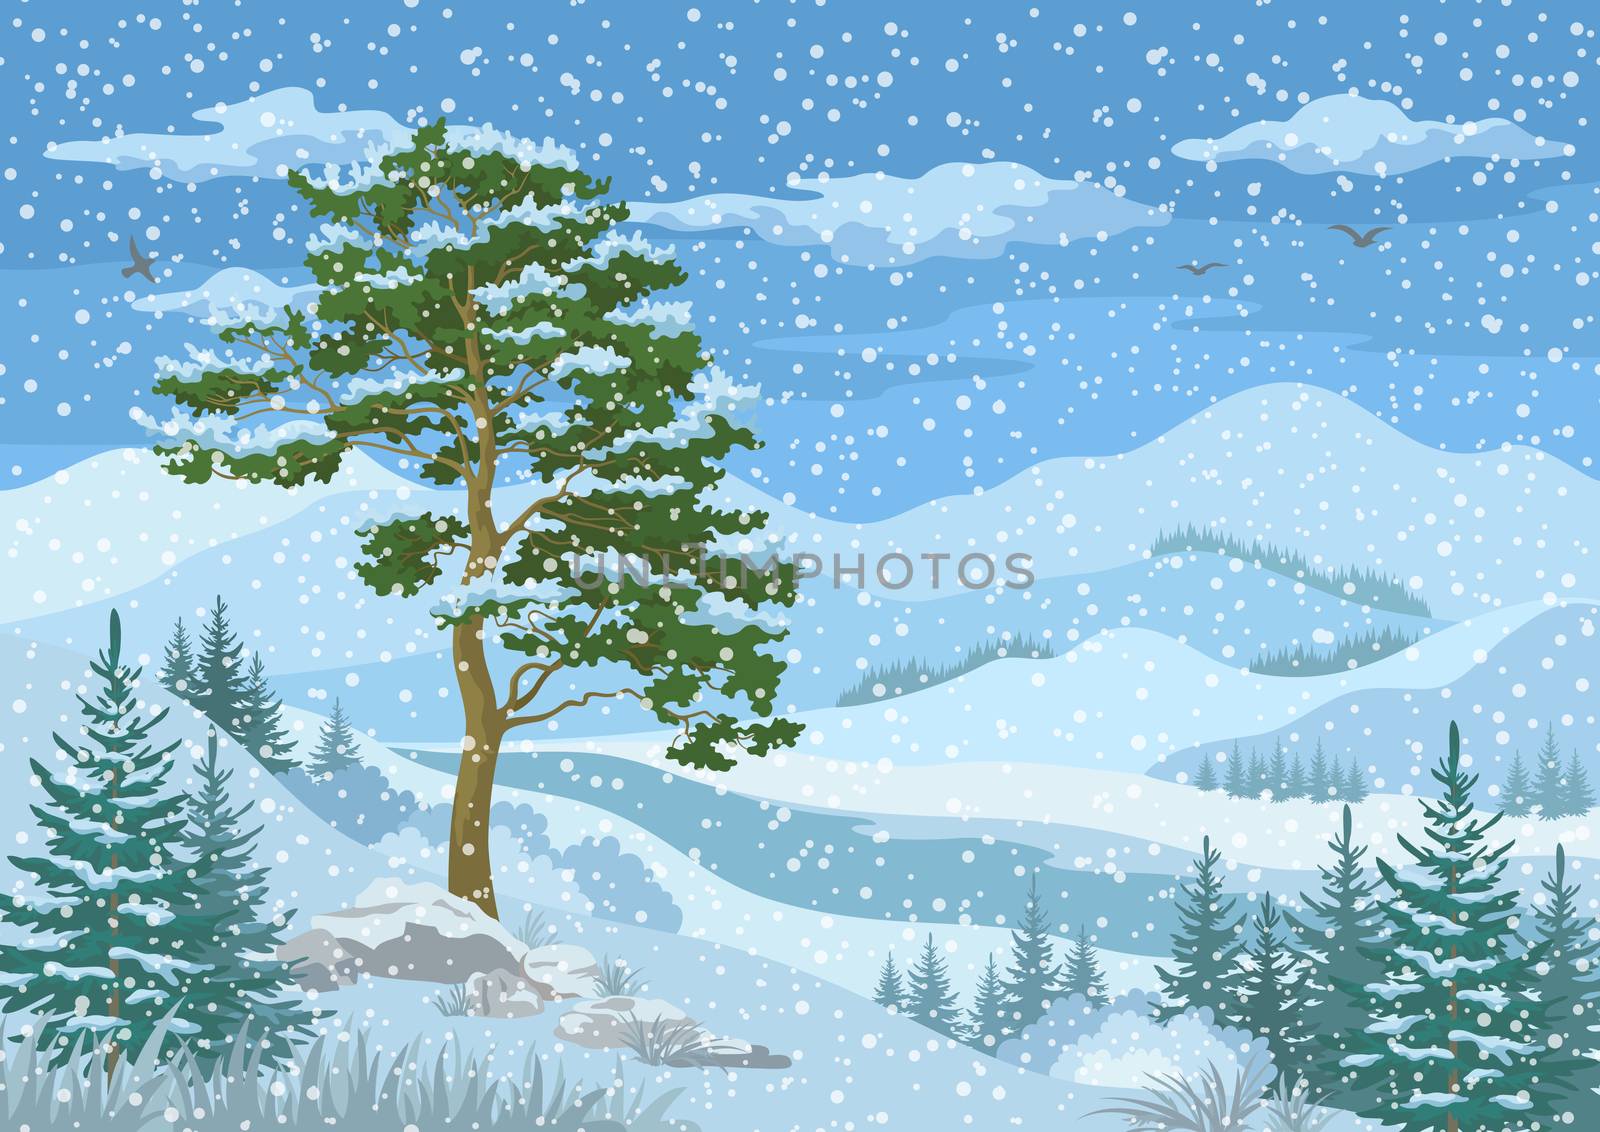 Winter Mountain Landscape with Pine and Fir Trees, Blue Sky with Snow, Birds and Clouds